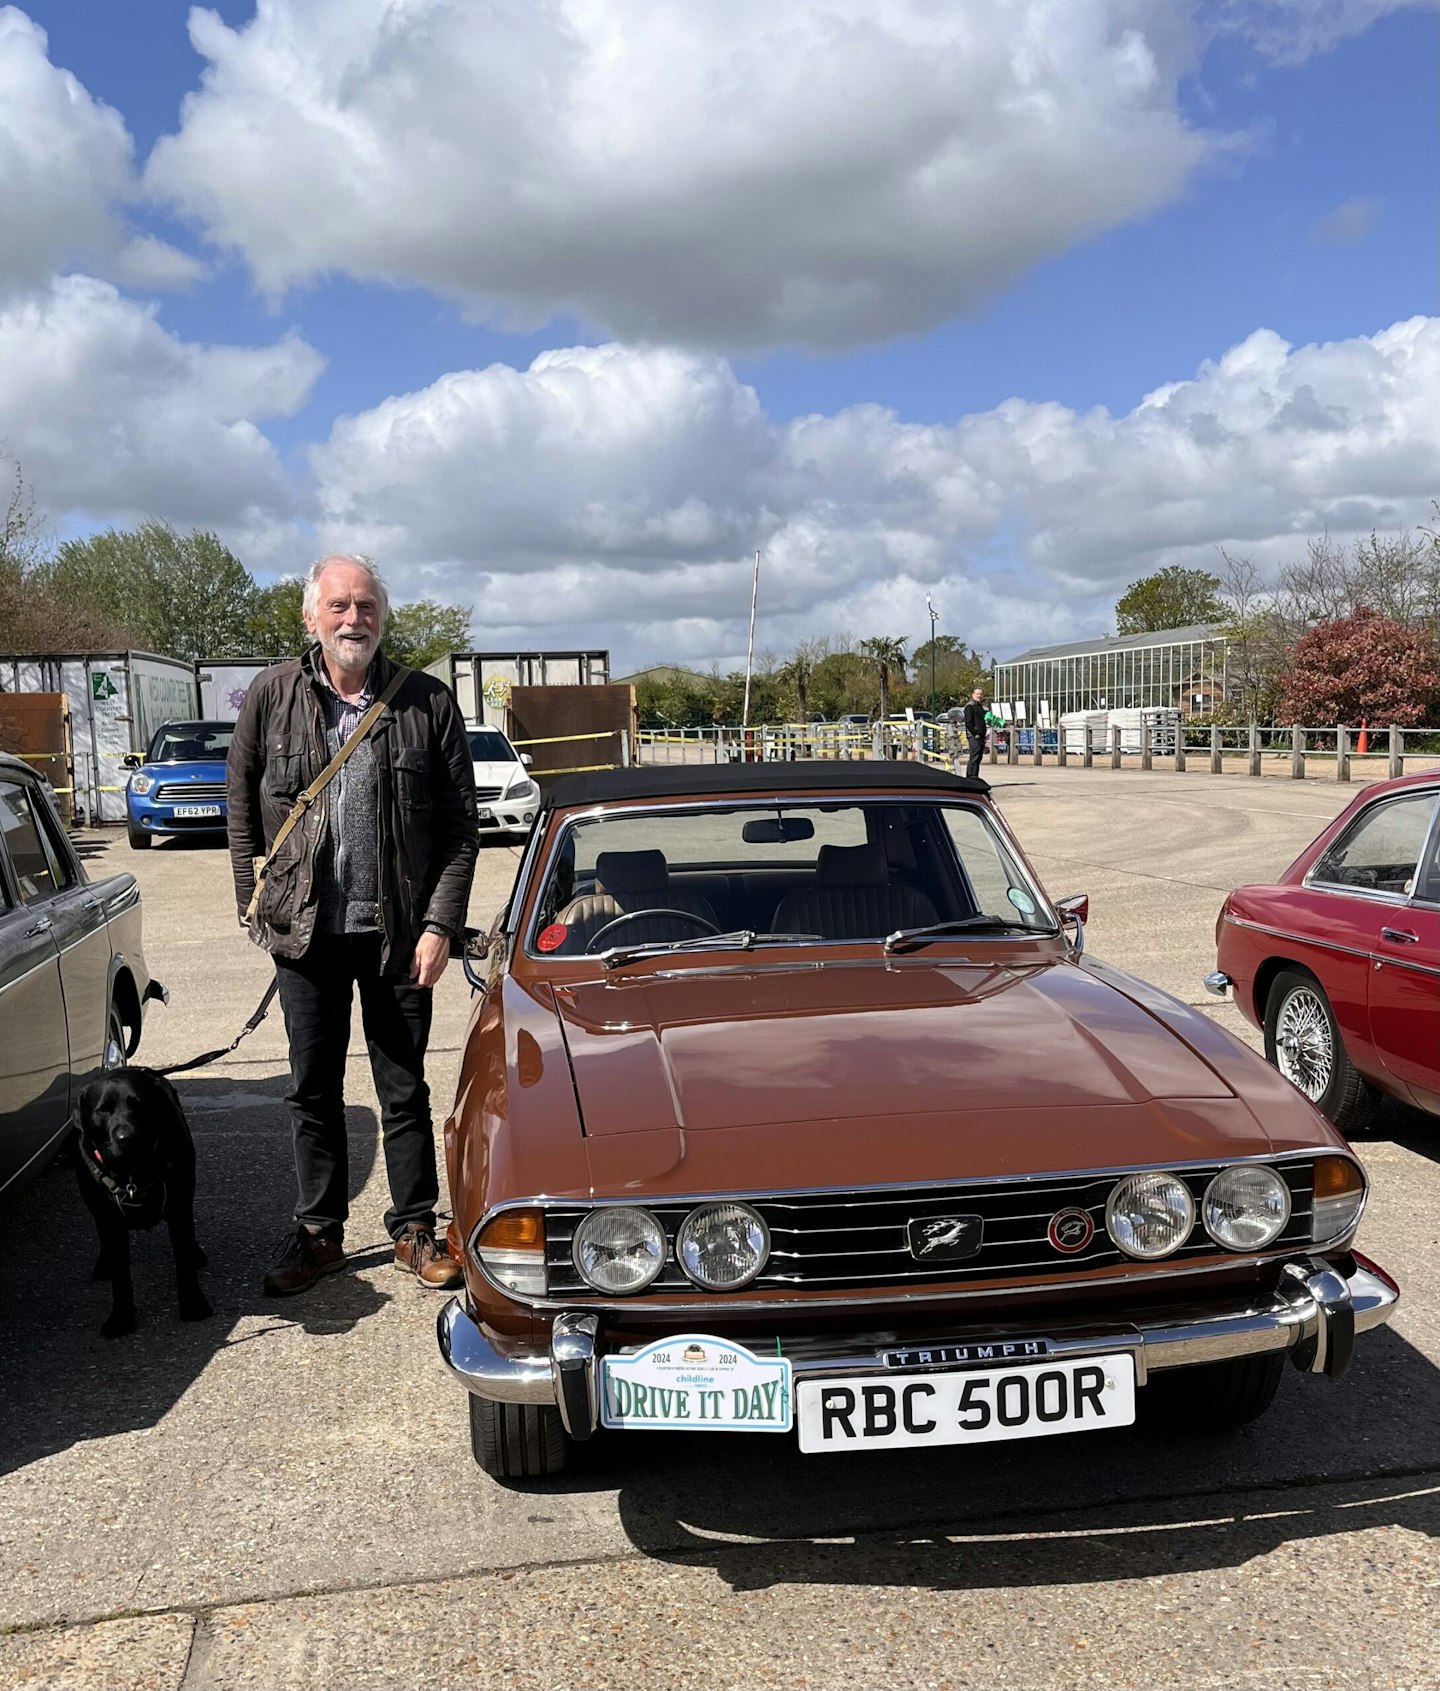 Dylan Edwards took labrador Monty out for a run in this 1976 Triumph Stag.